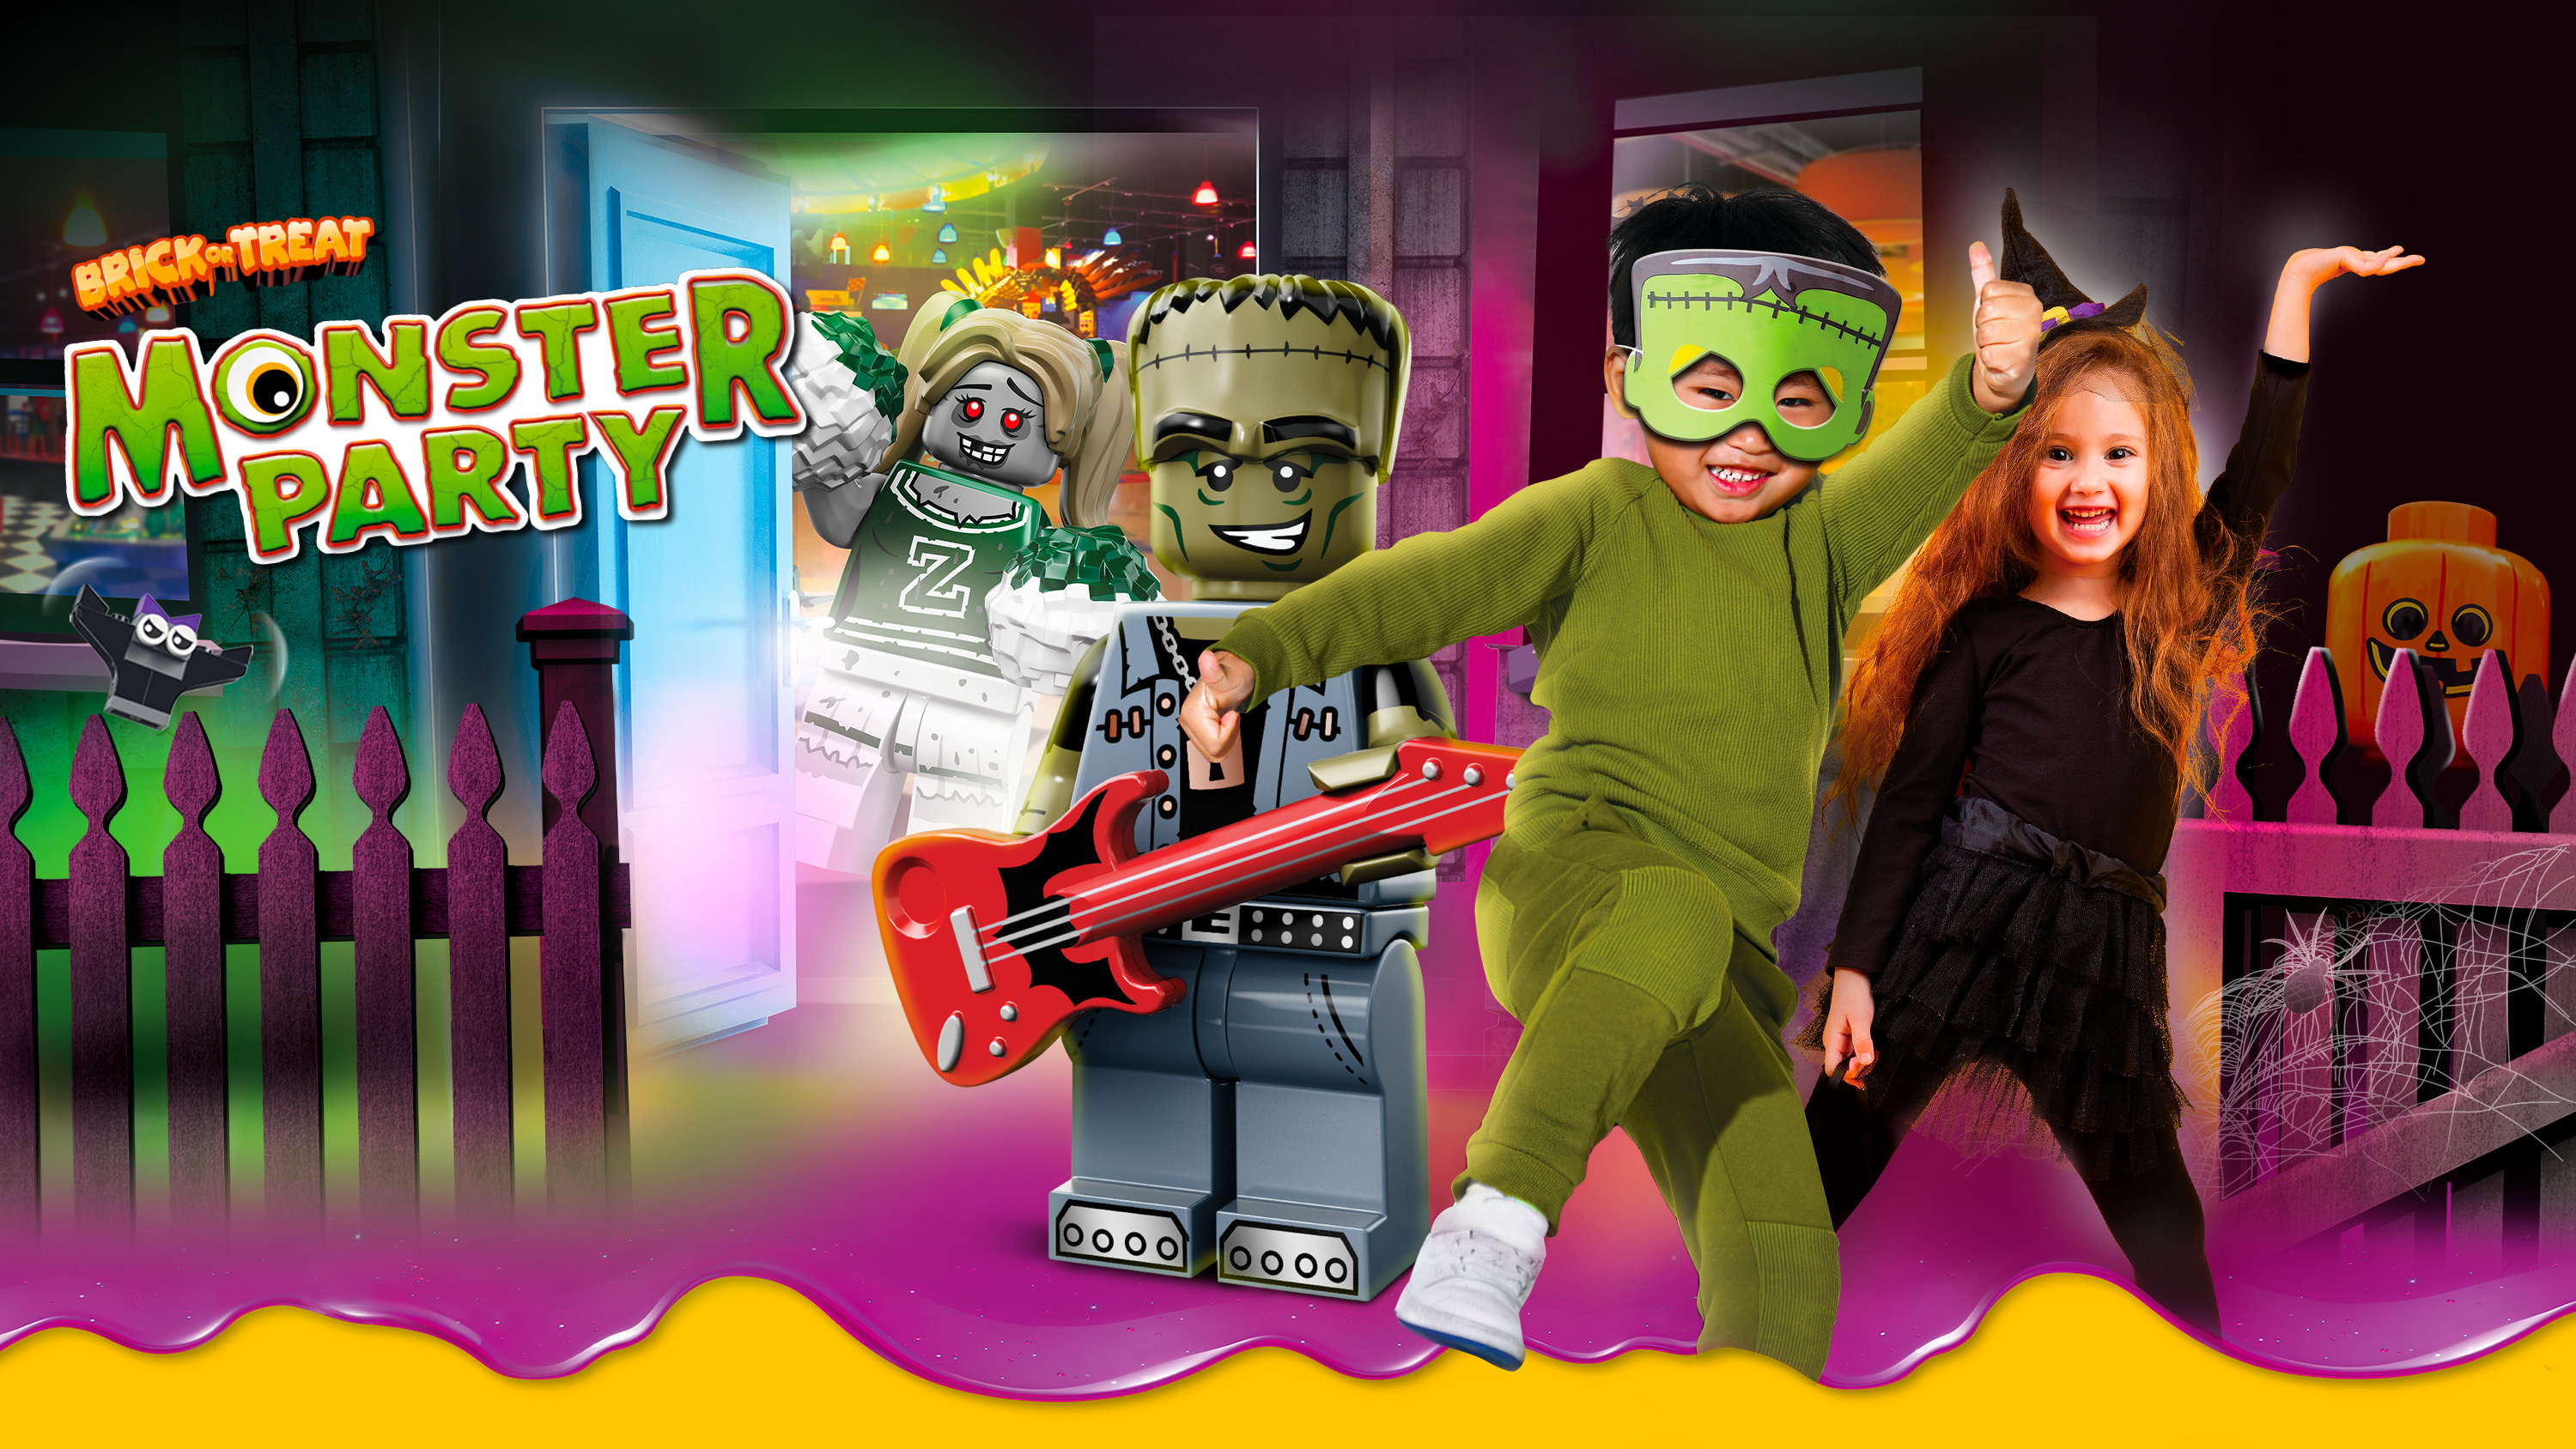 Brick or Treat: Monster Party